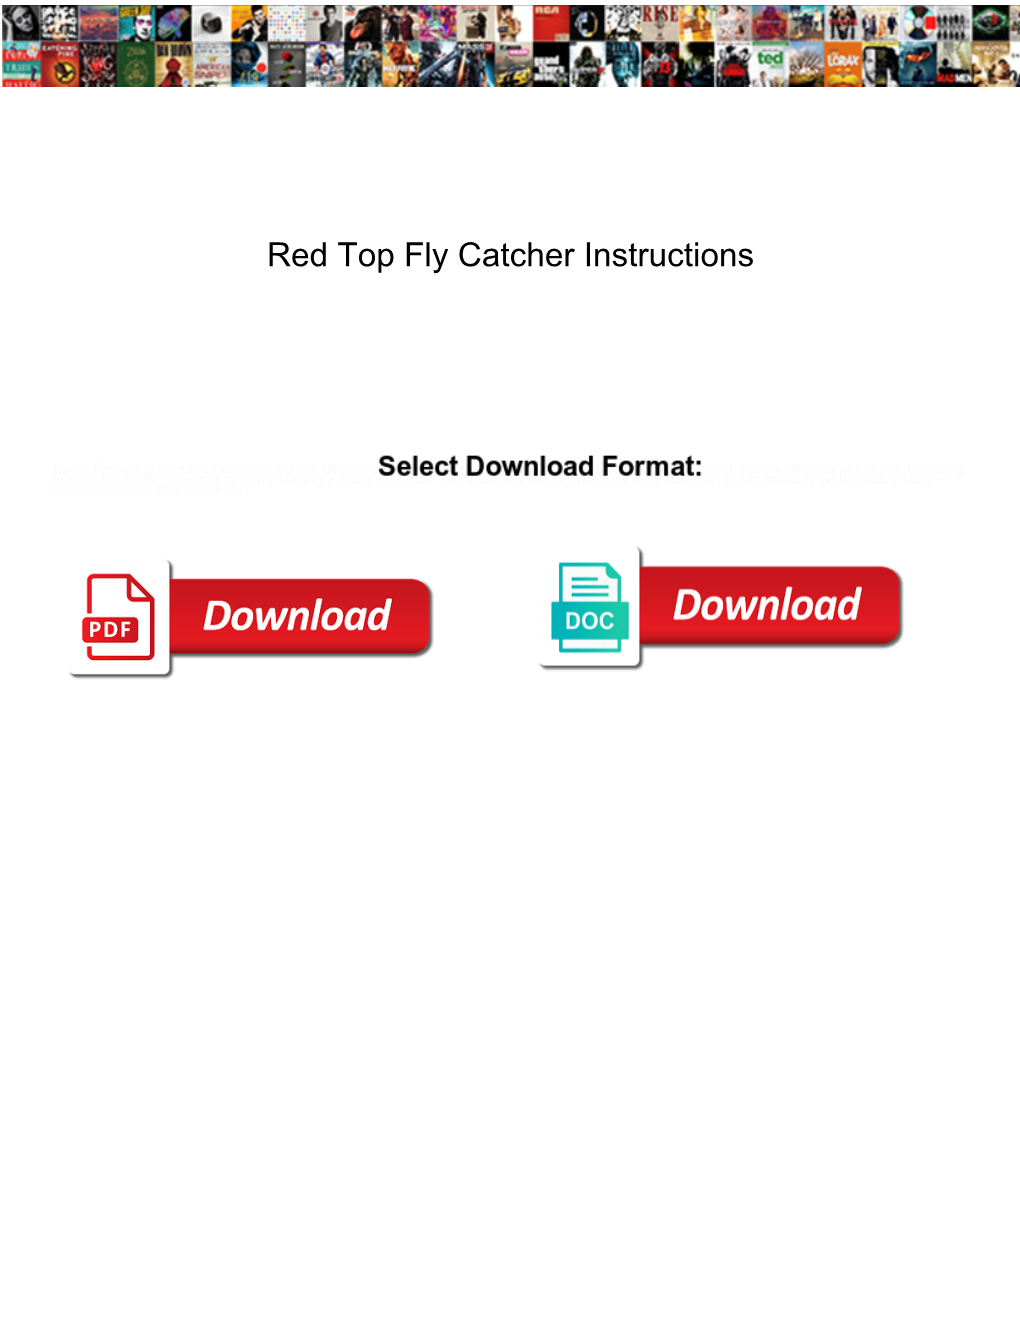 Red Top Fly Catcher Instructions